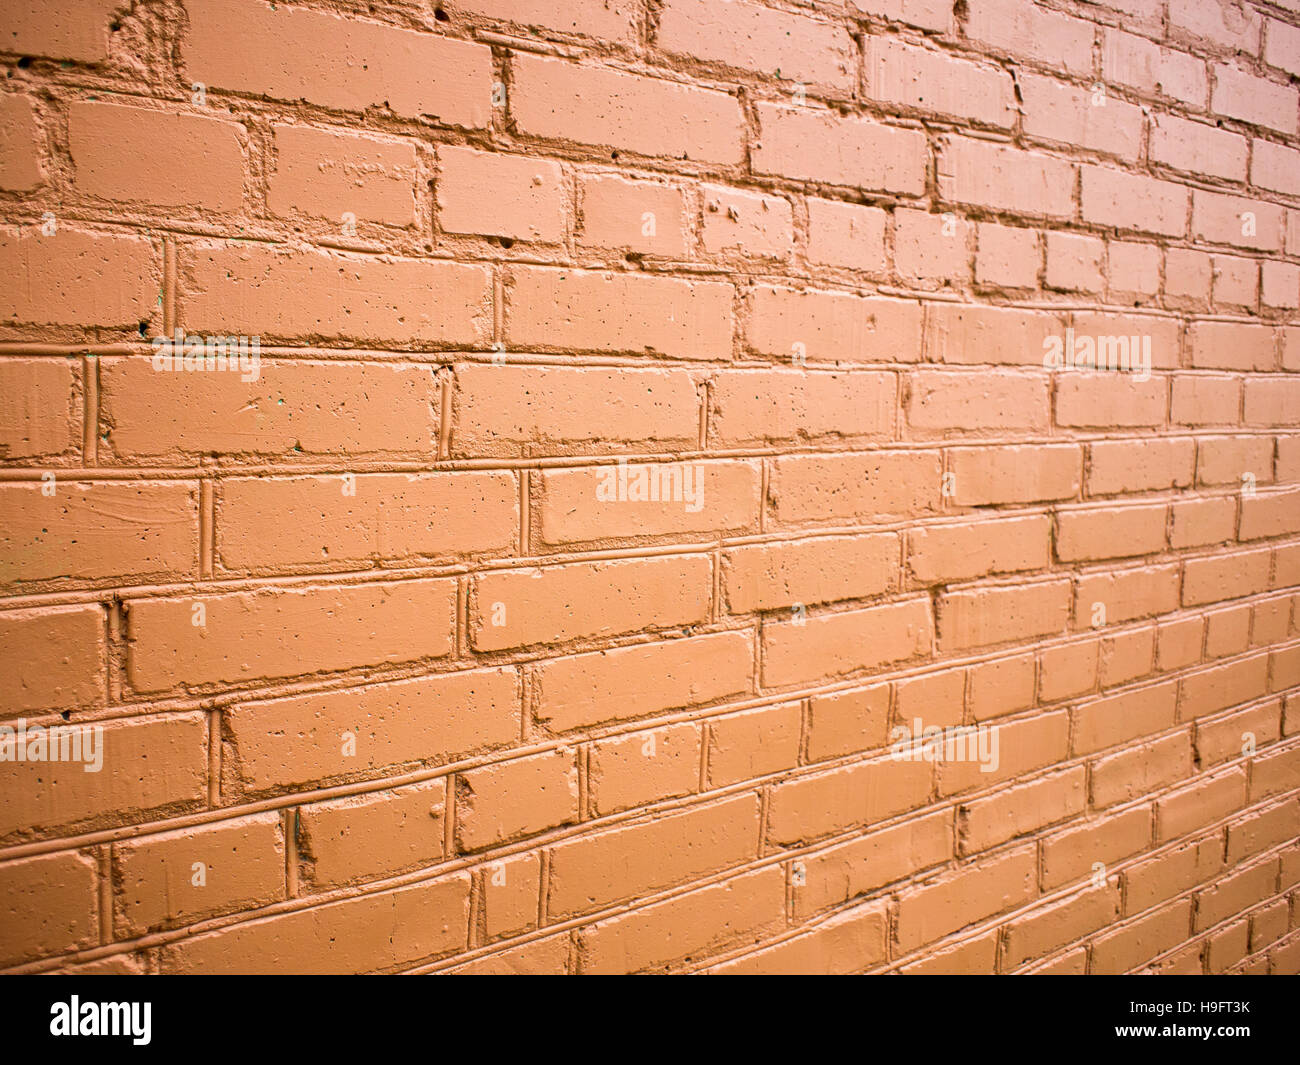 View angle on the brick wall, painted in red paint Stock Photo